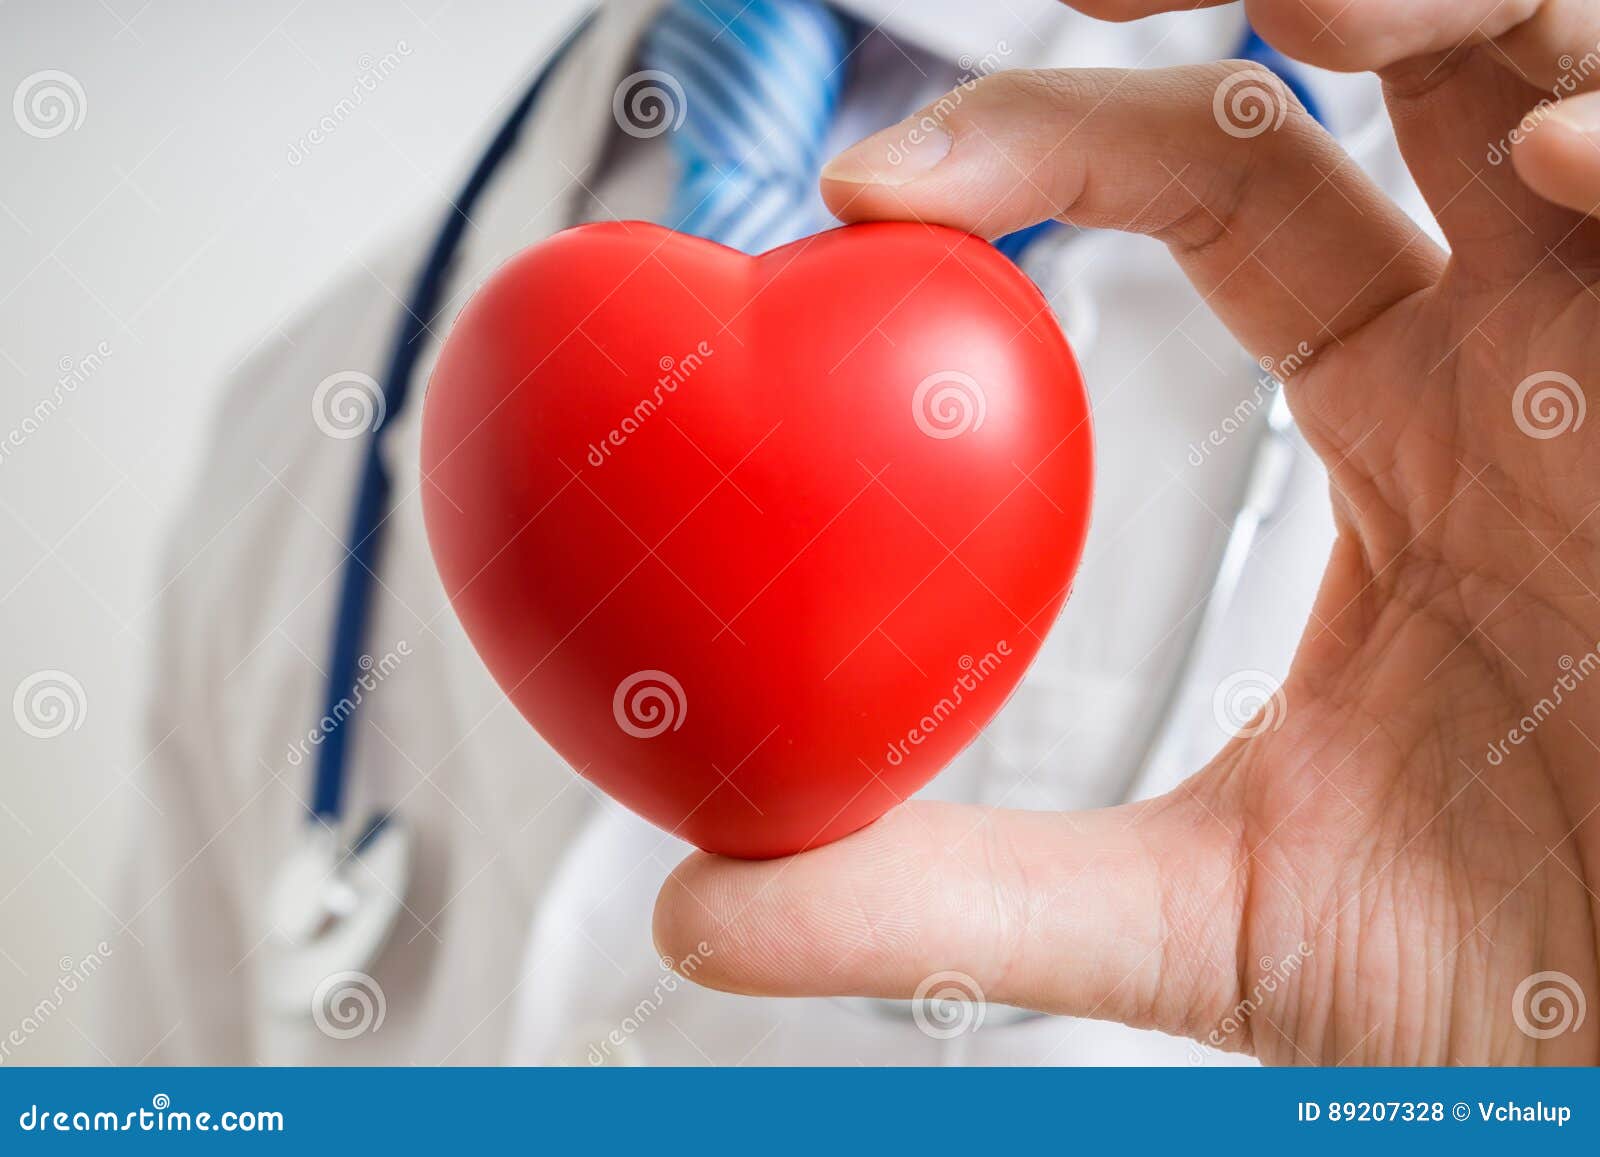 cardiologist doctor is showing red heart